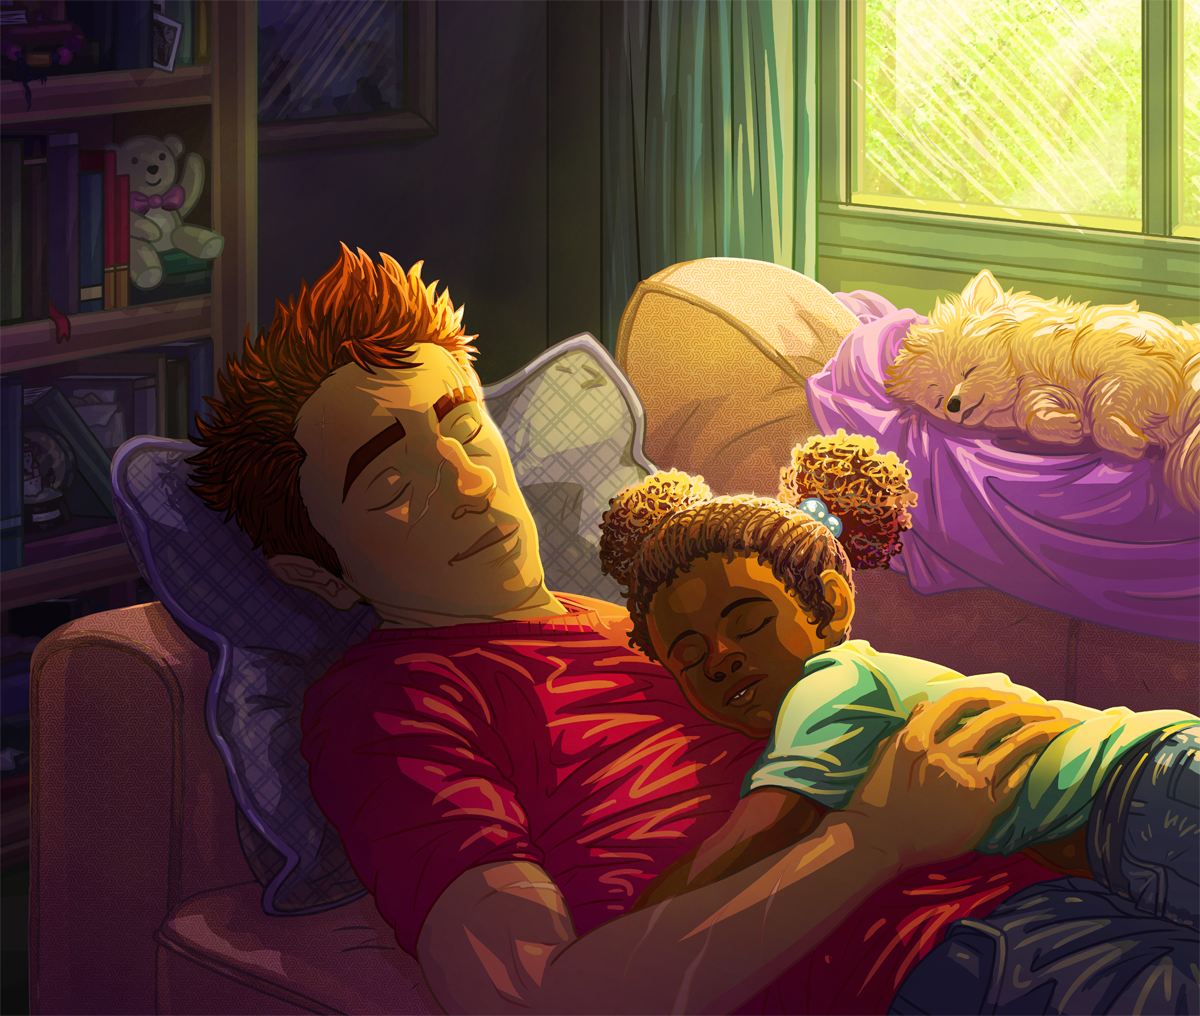 Father sleeping on a couch with one of his children asleep on his chest. Both look peaceful and light is shining on them from the window. A small pomeranian is also asleep on the top of the couch, curled up on a blanket.